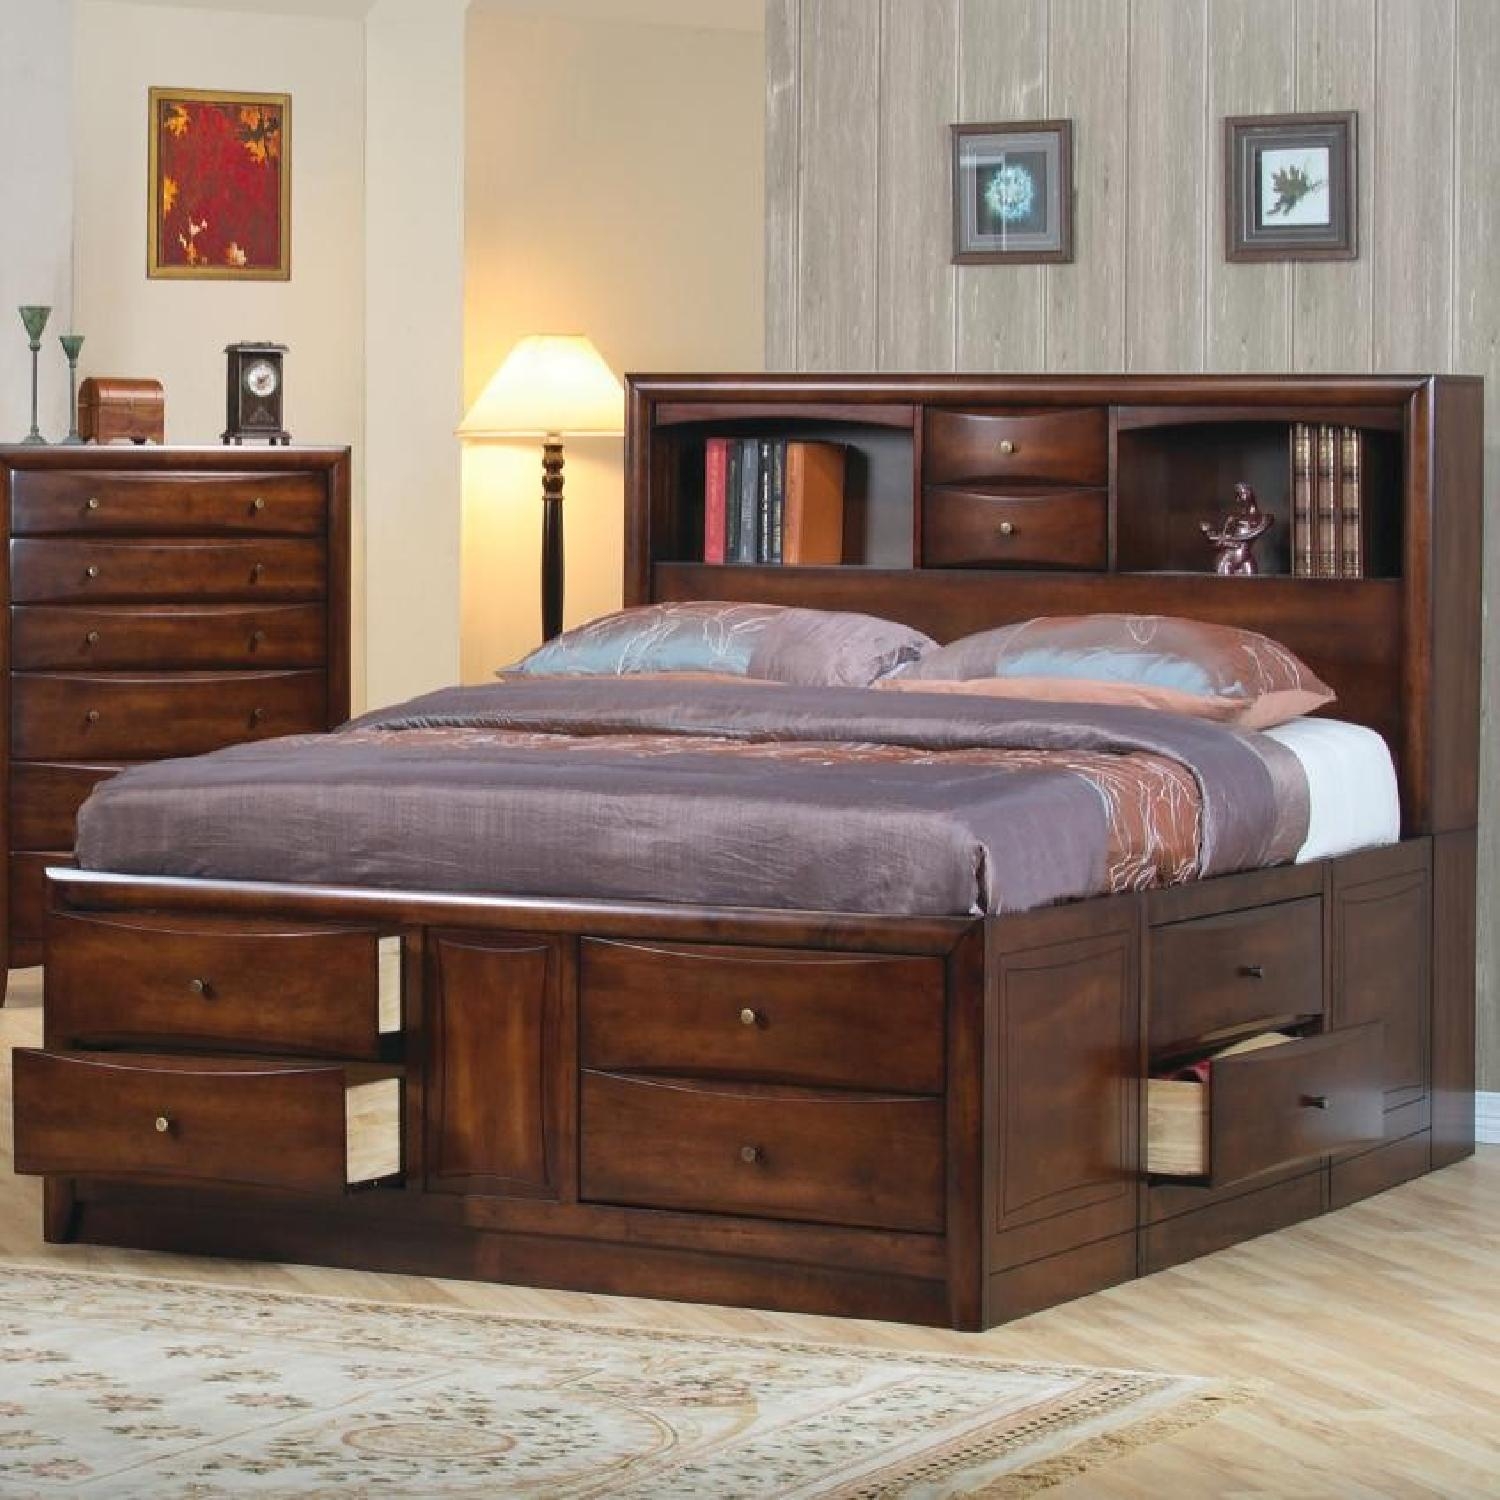 Coaster king size bookcase chest bed in brown finish coaster